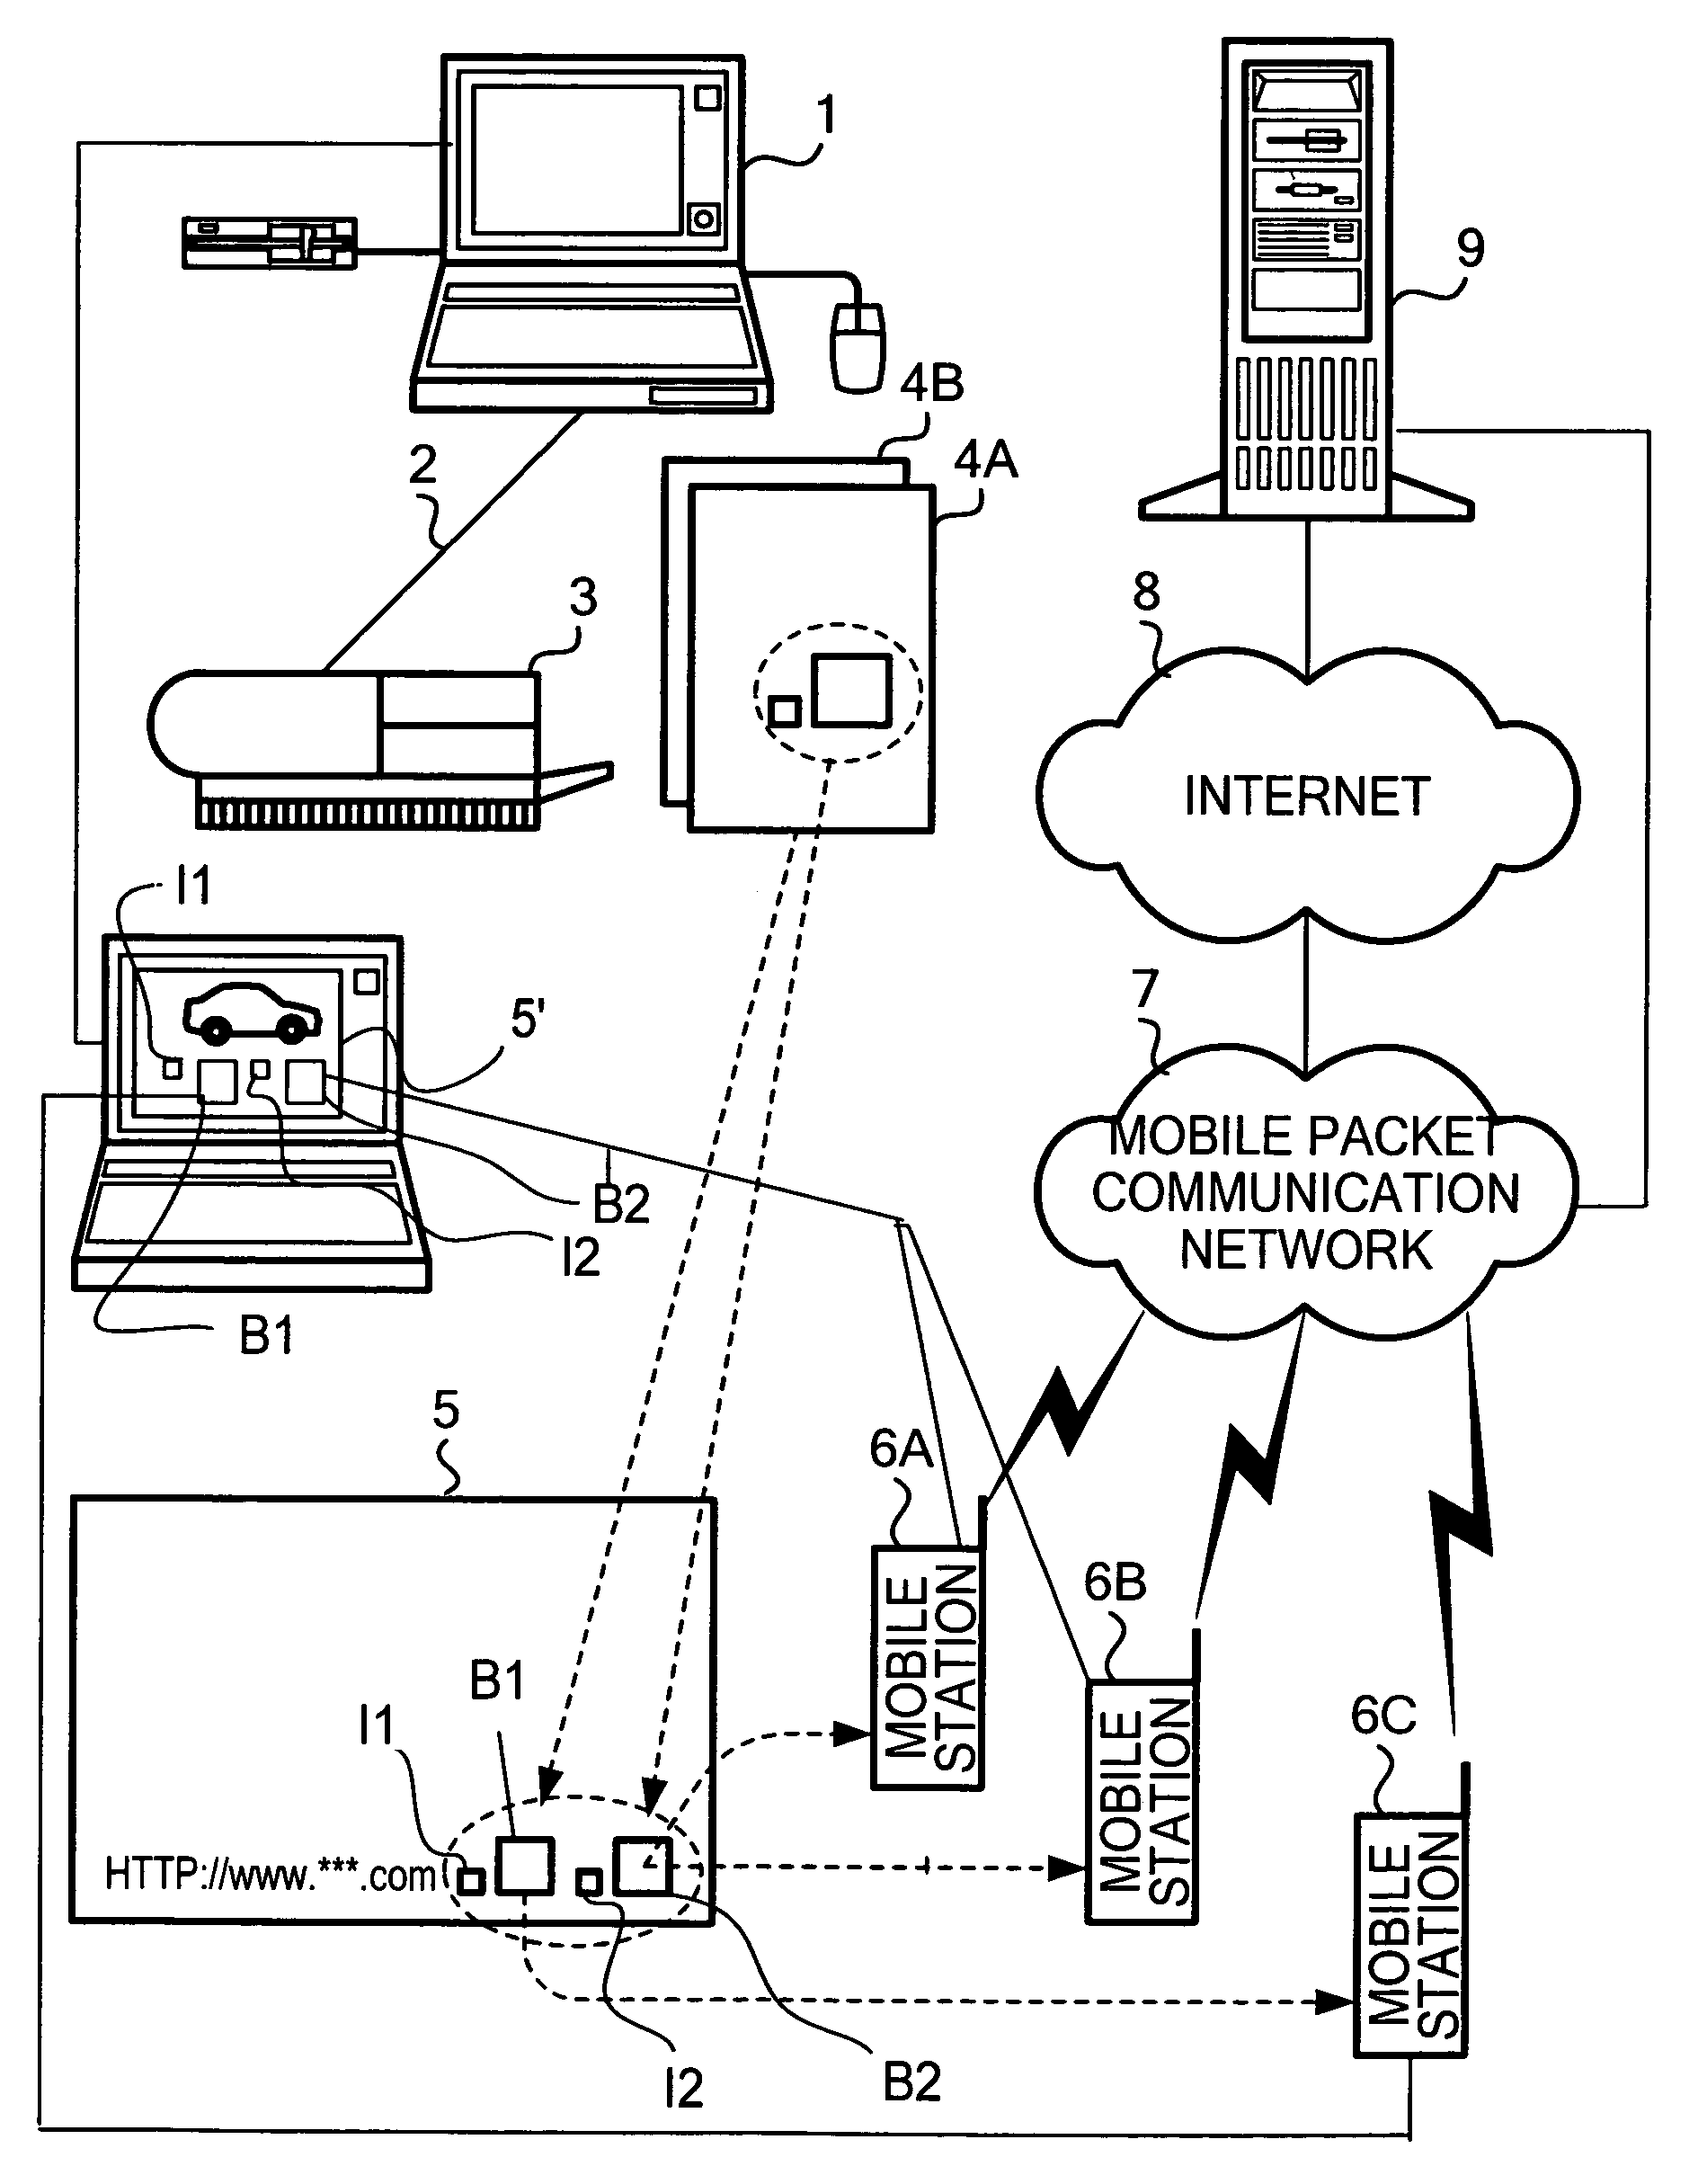 Apparatus and method for reading and decoding information contained in a barcode